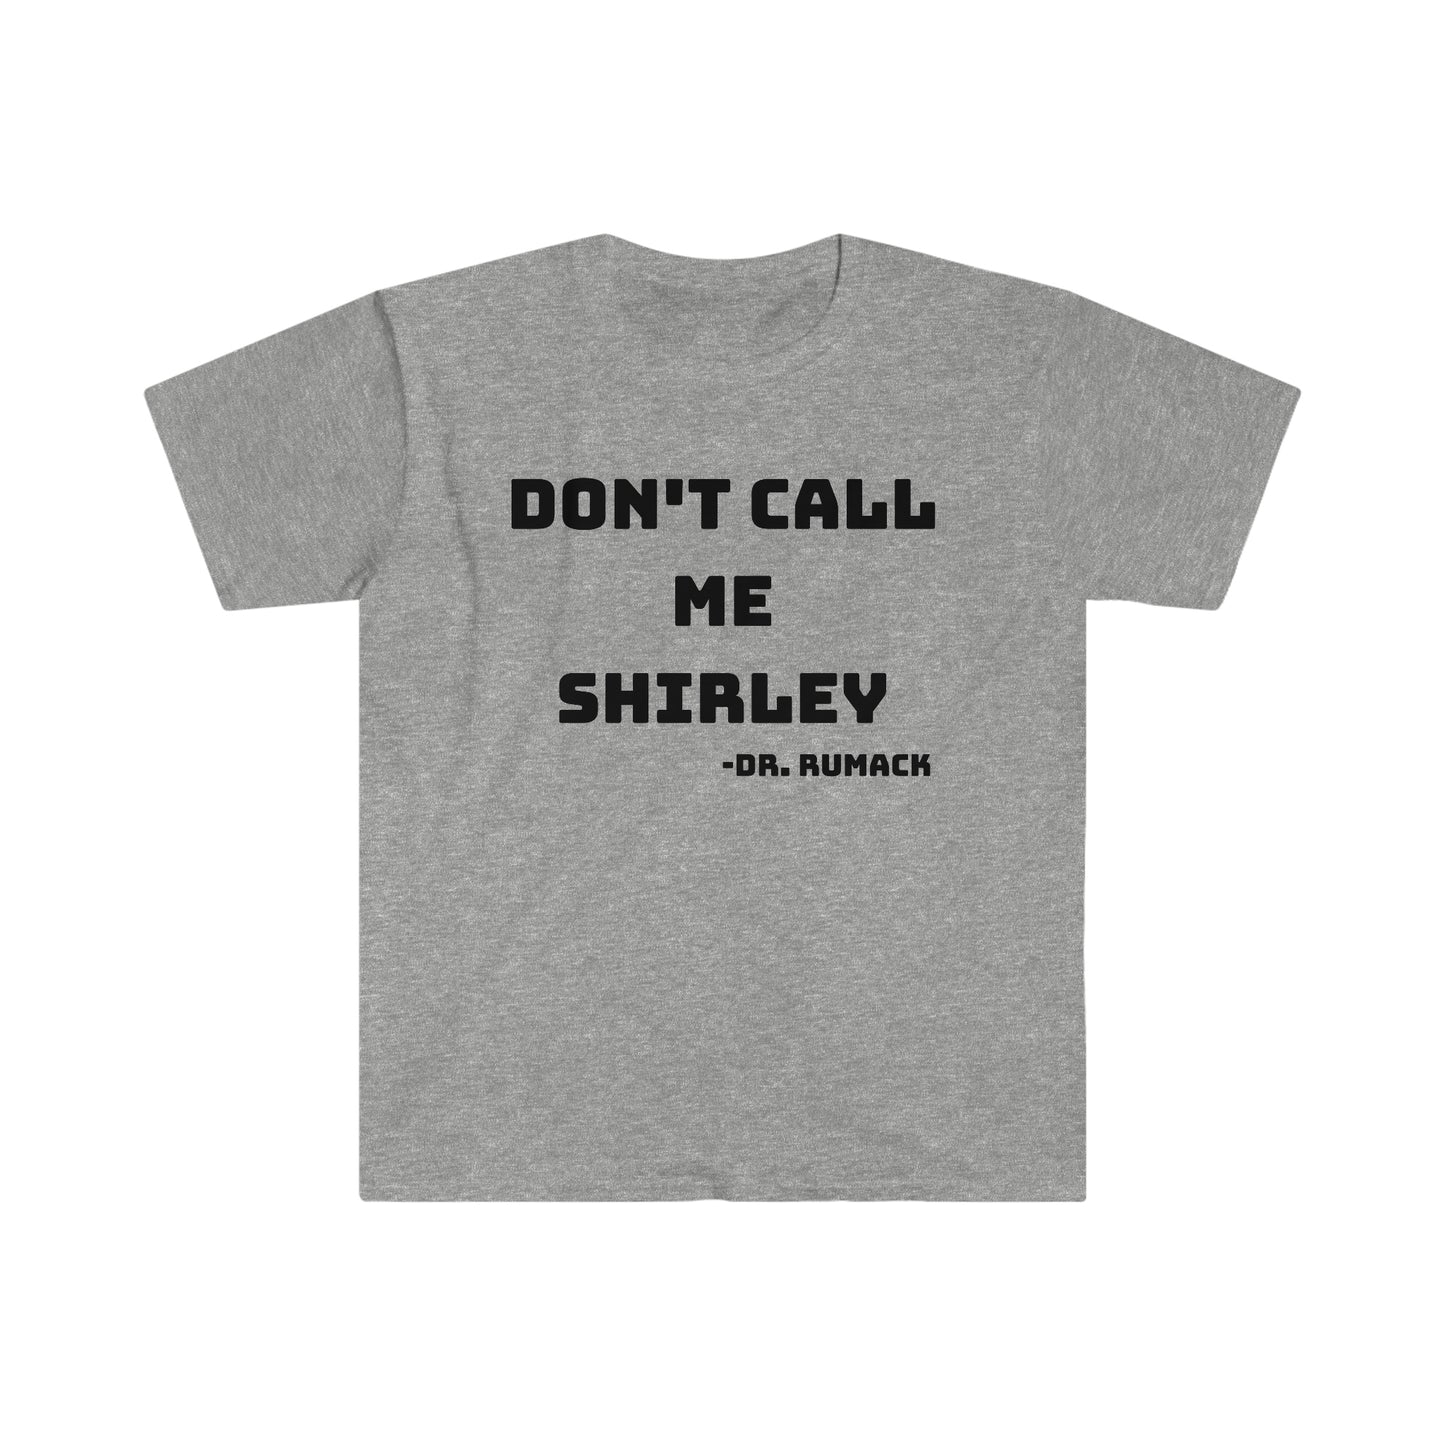 Don't Call Me Shirley! Airplane Movie Quote T-Shirt